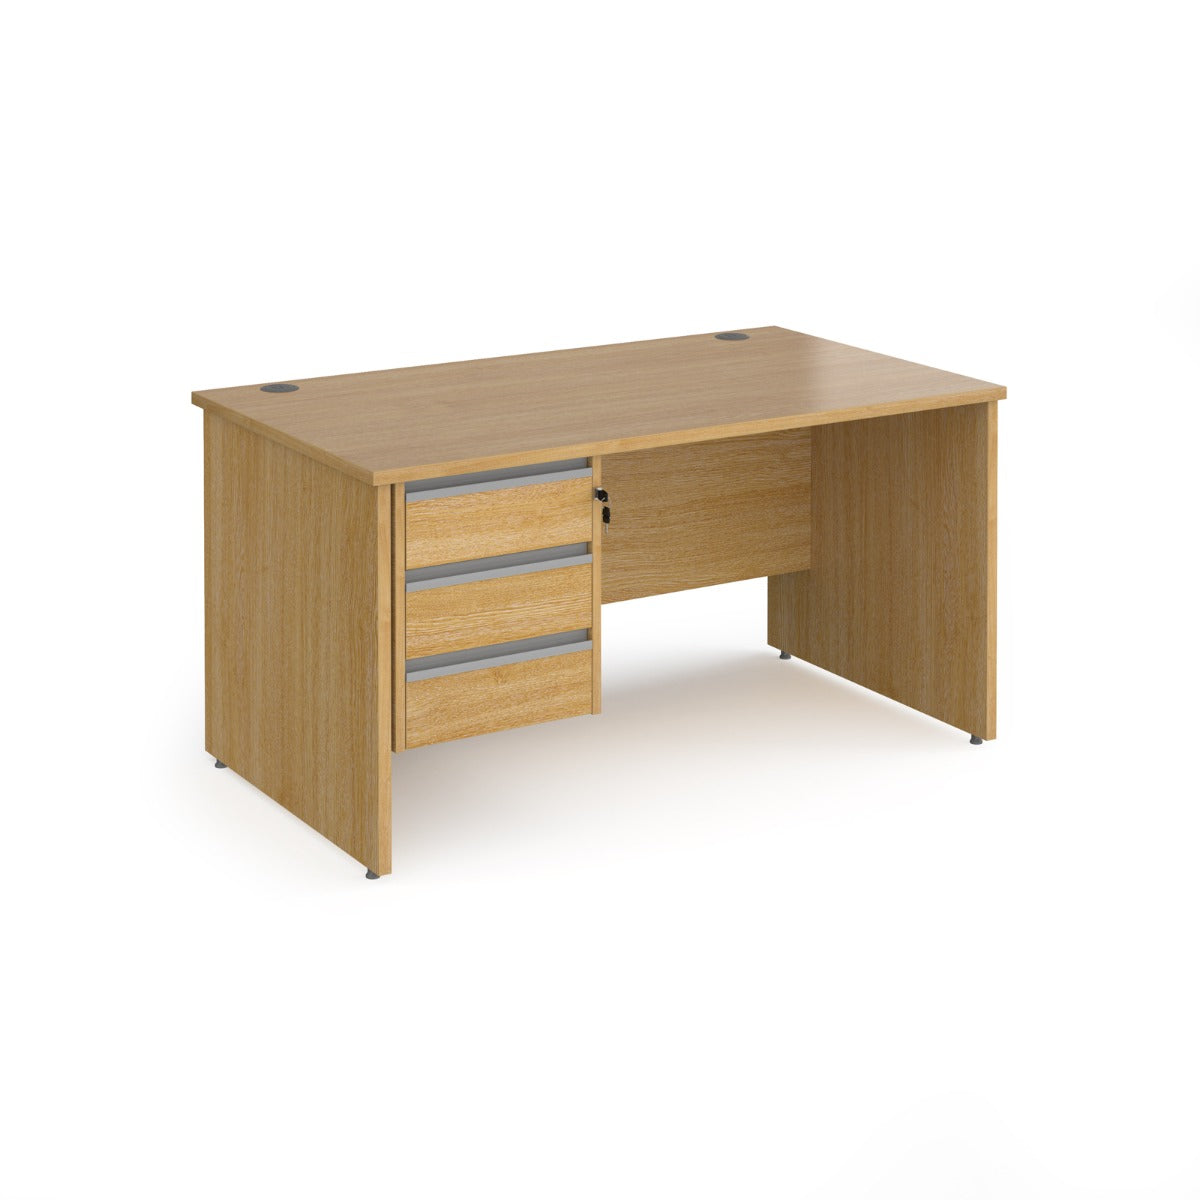 Contract Panel Leg Straight Office Desk with Three Drawer Storage